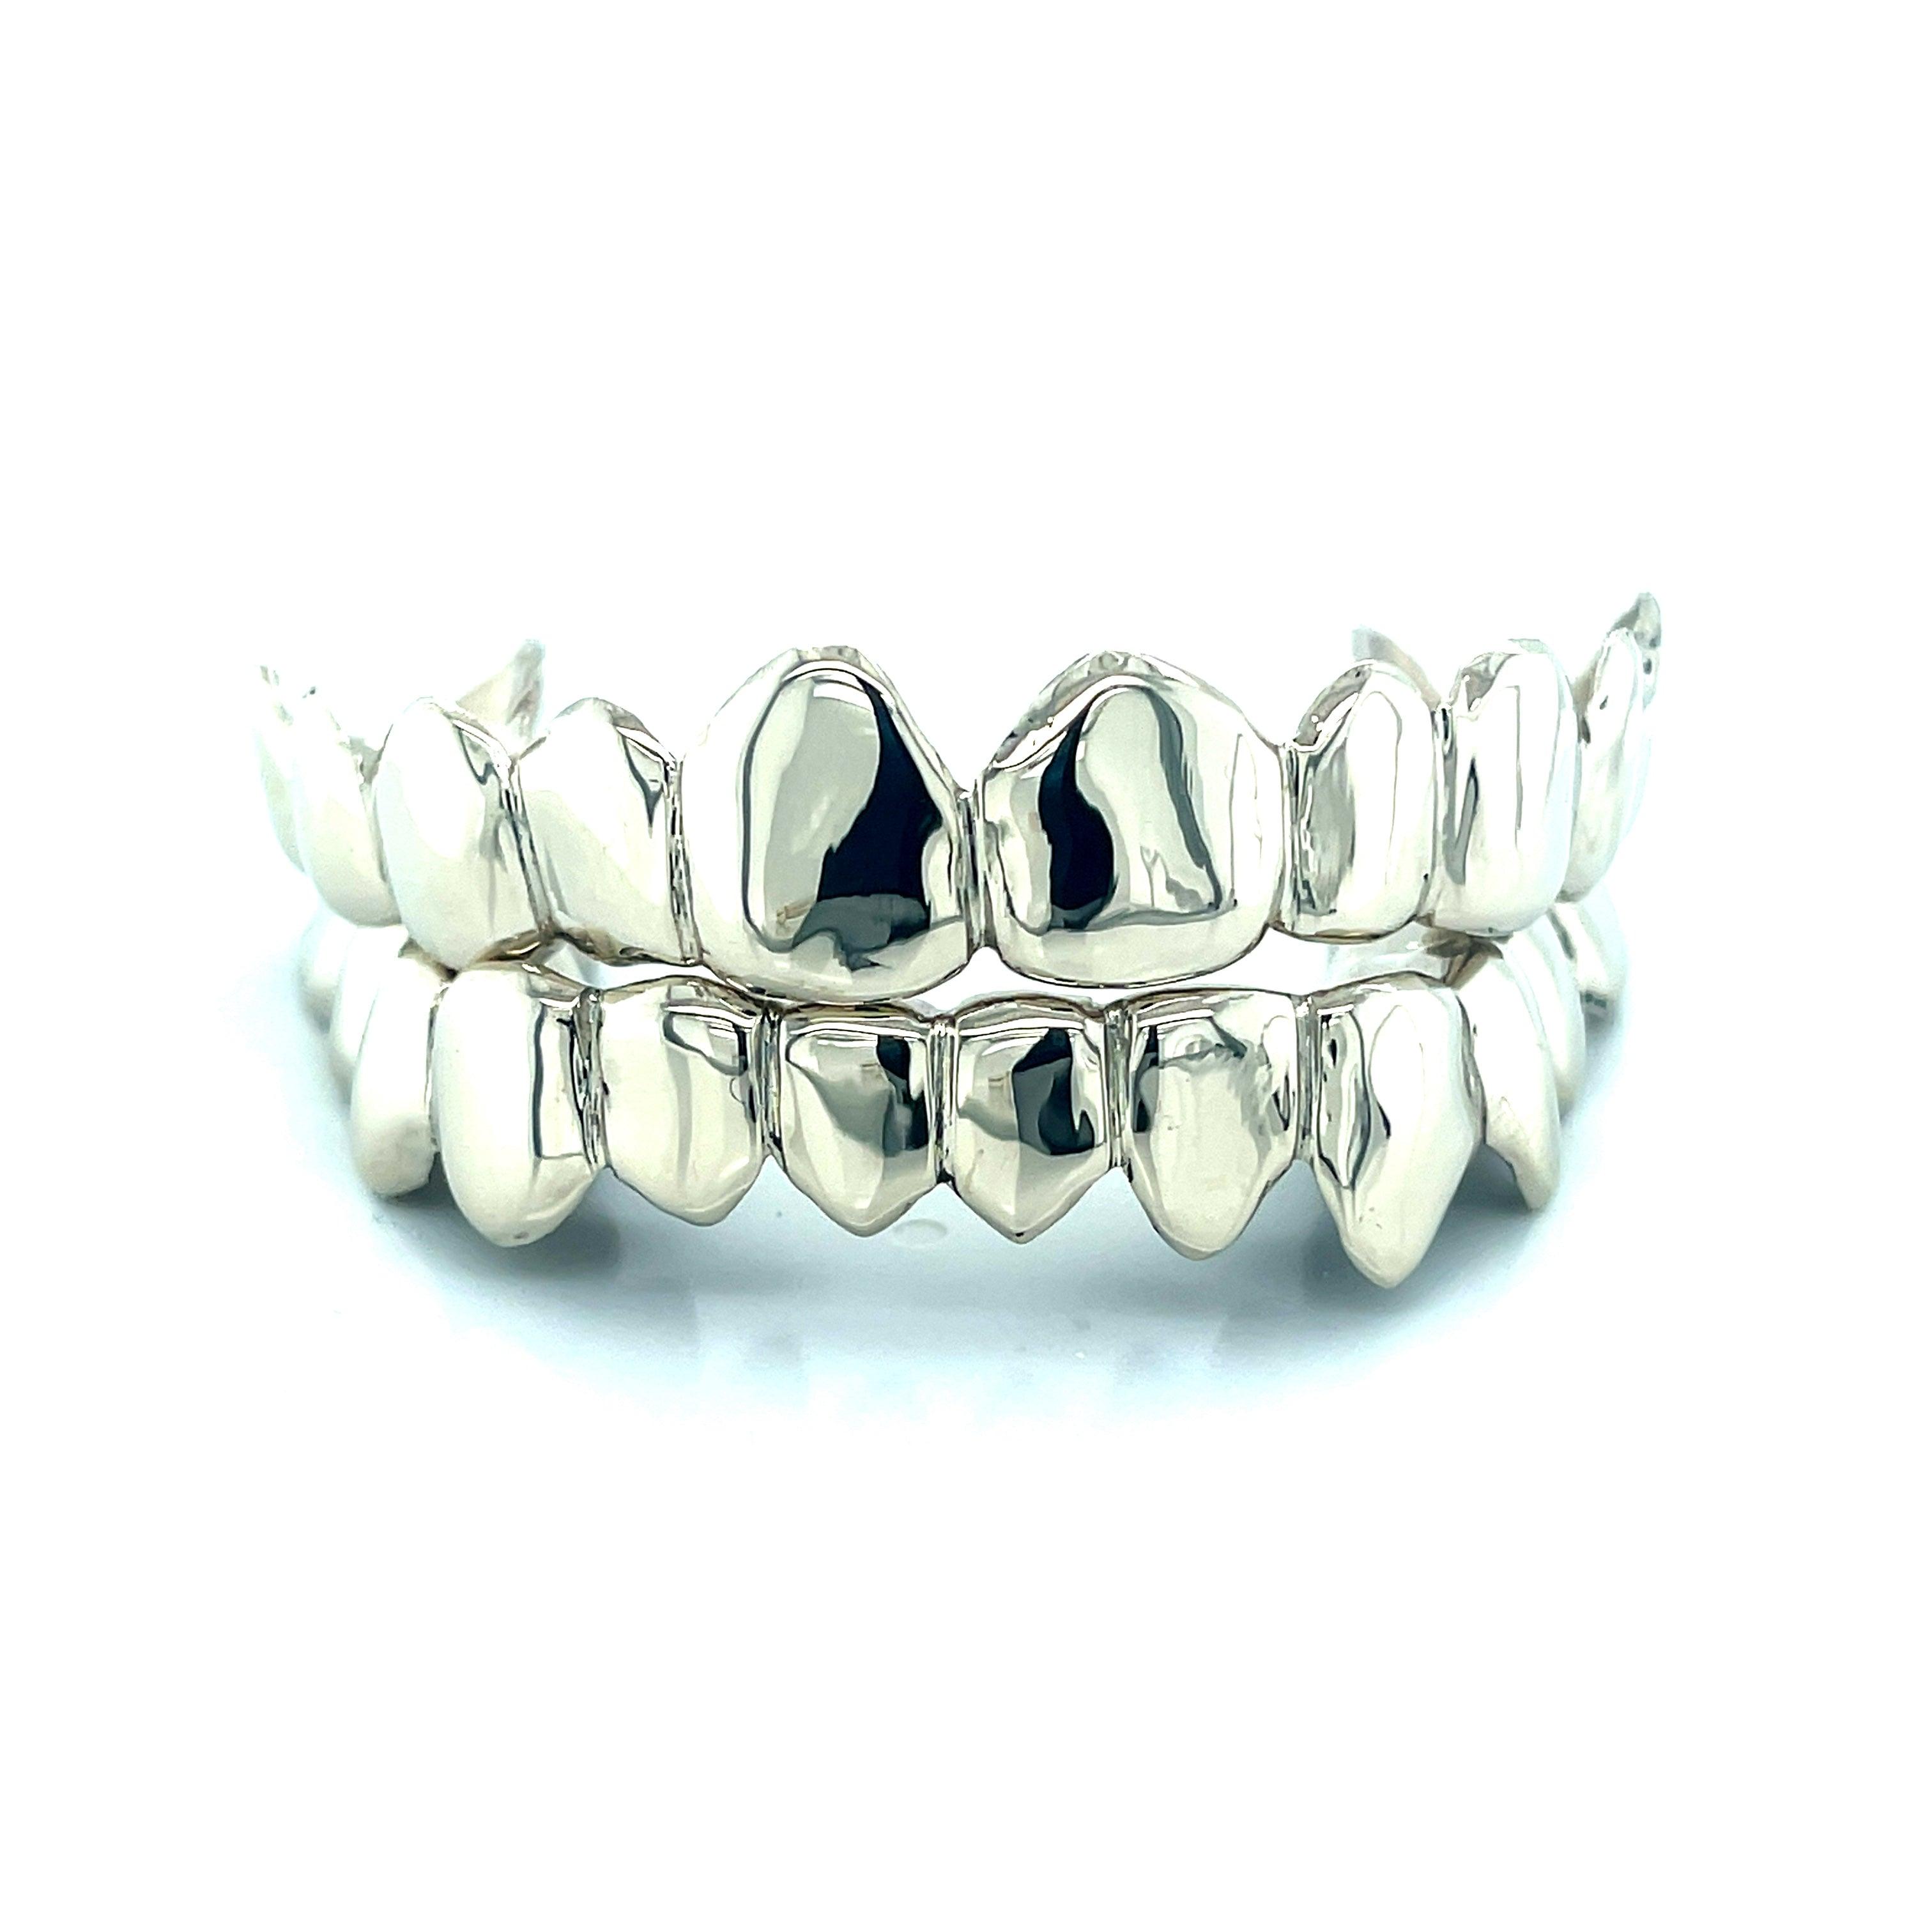 24pc Gold High Polished Grillz - Seattle Gold Grillz